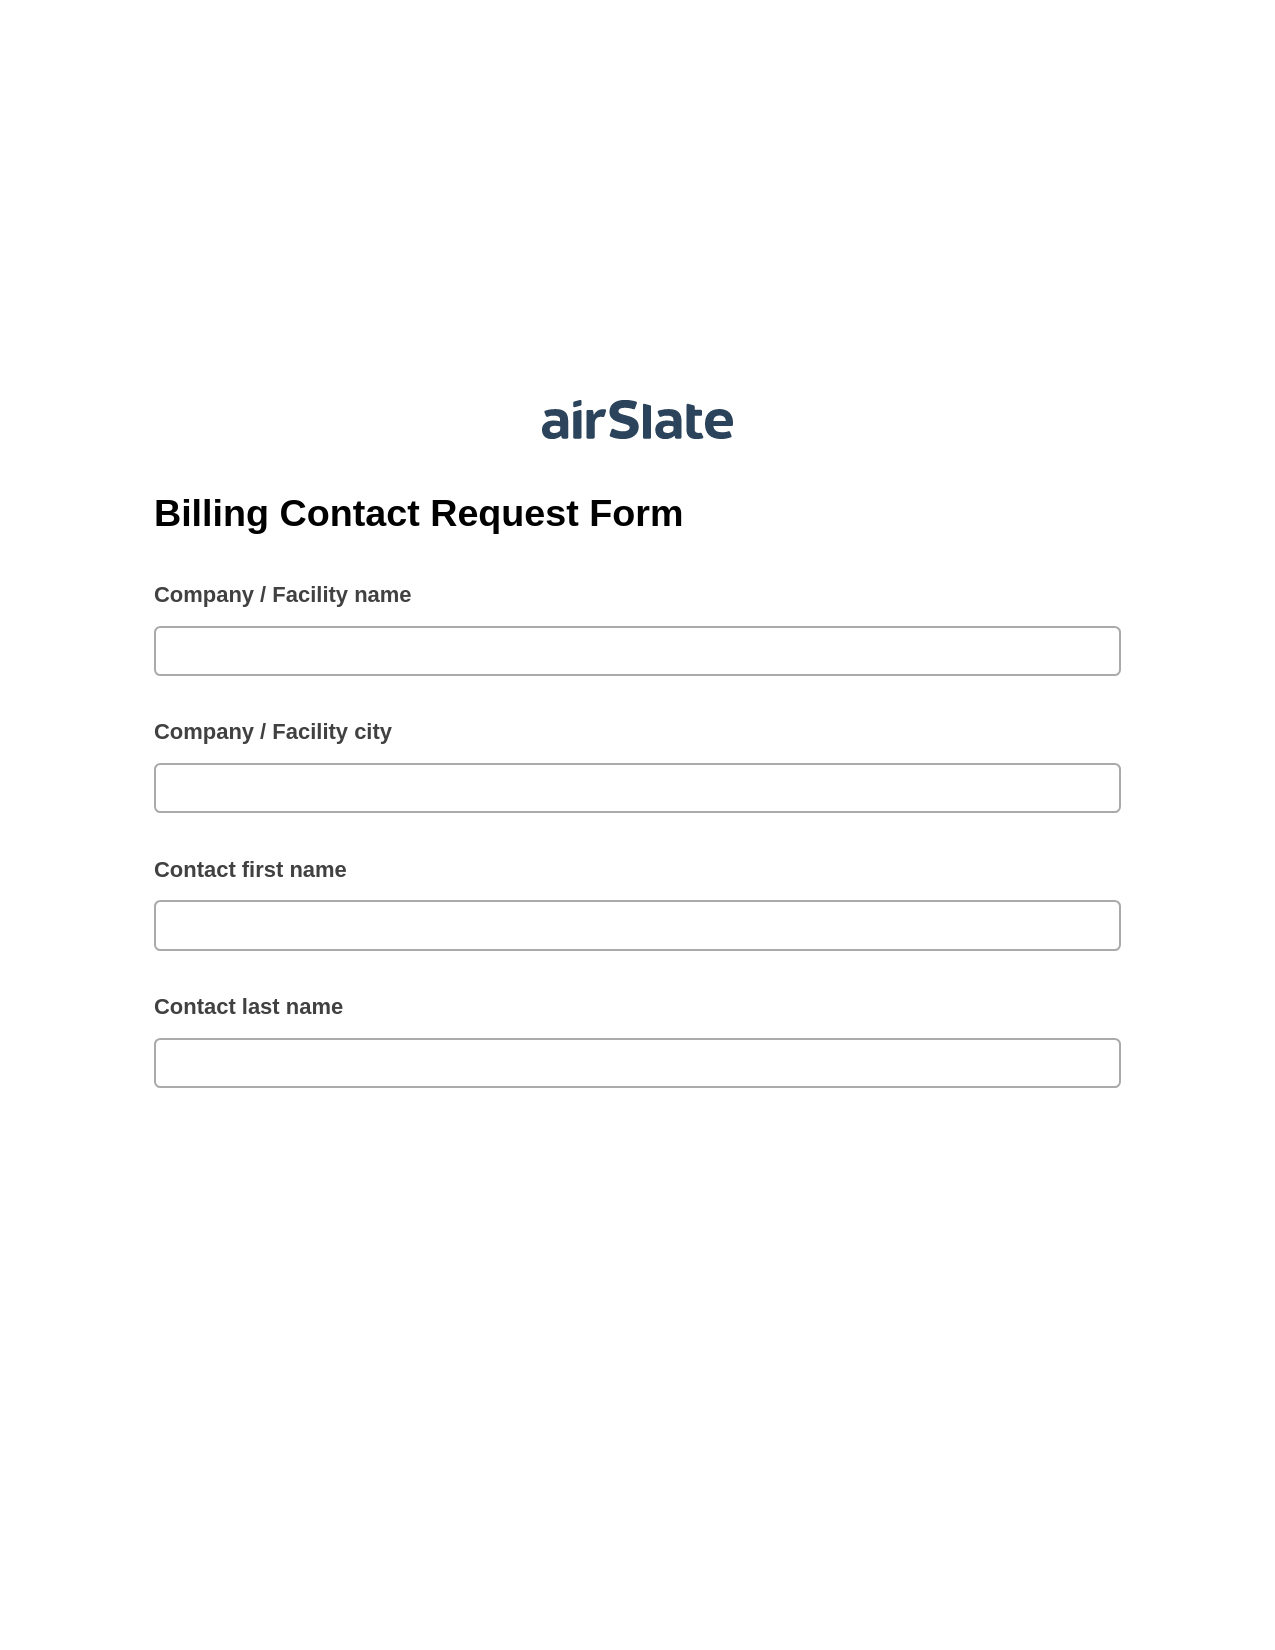 Multirole Billing Contact Request Form Pre-fill Dropdown from Airtable, Unassign Role Bot, Slack Notification Postfinish Bot